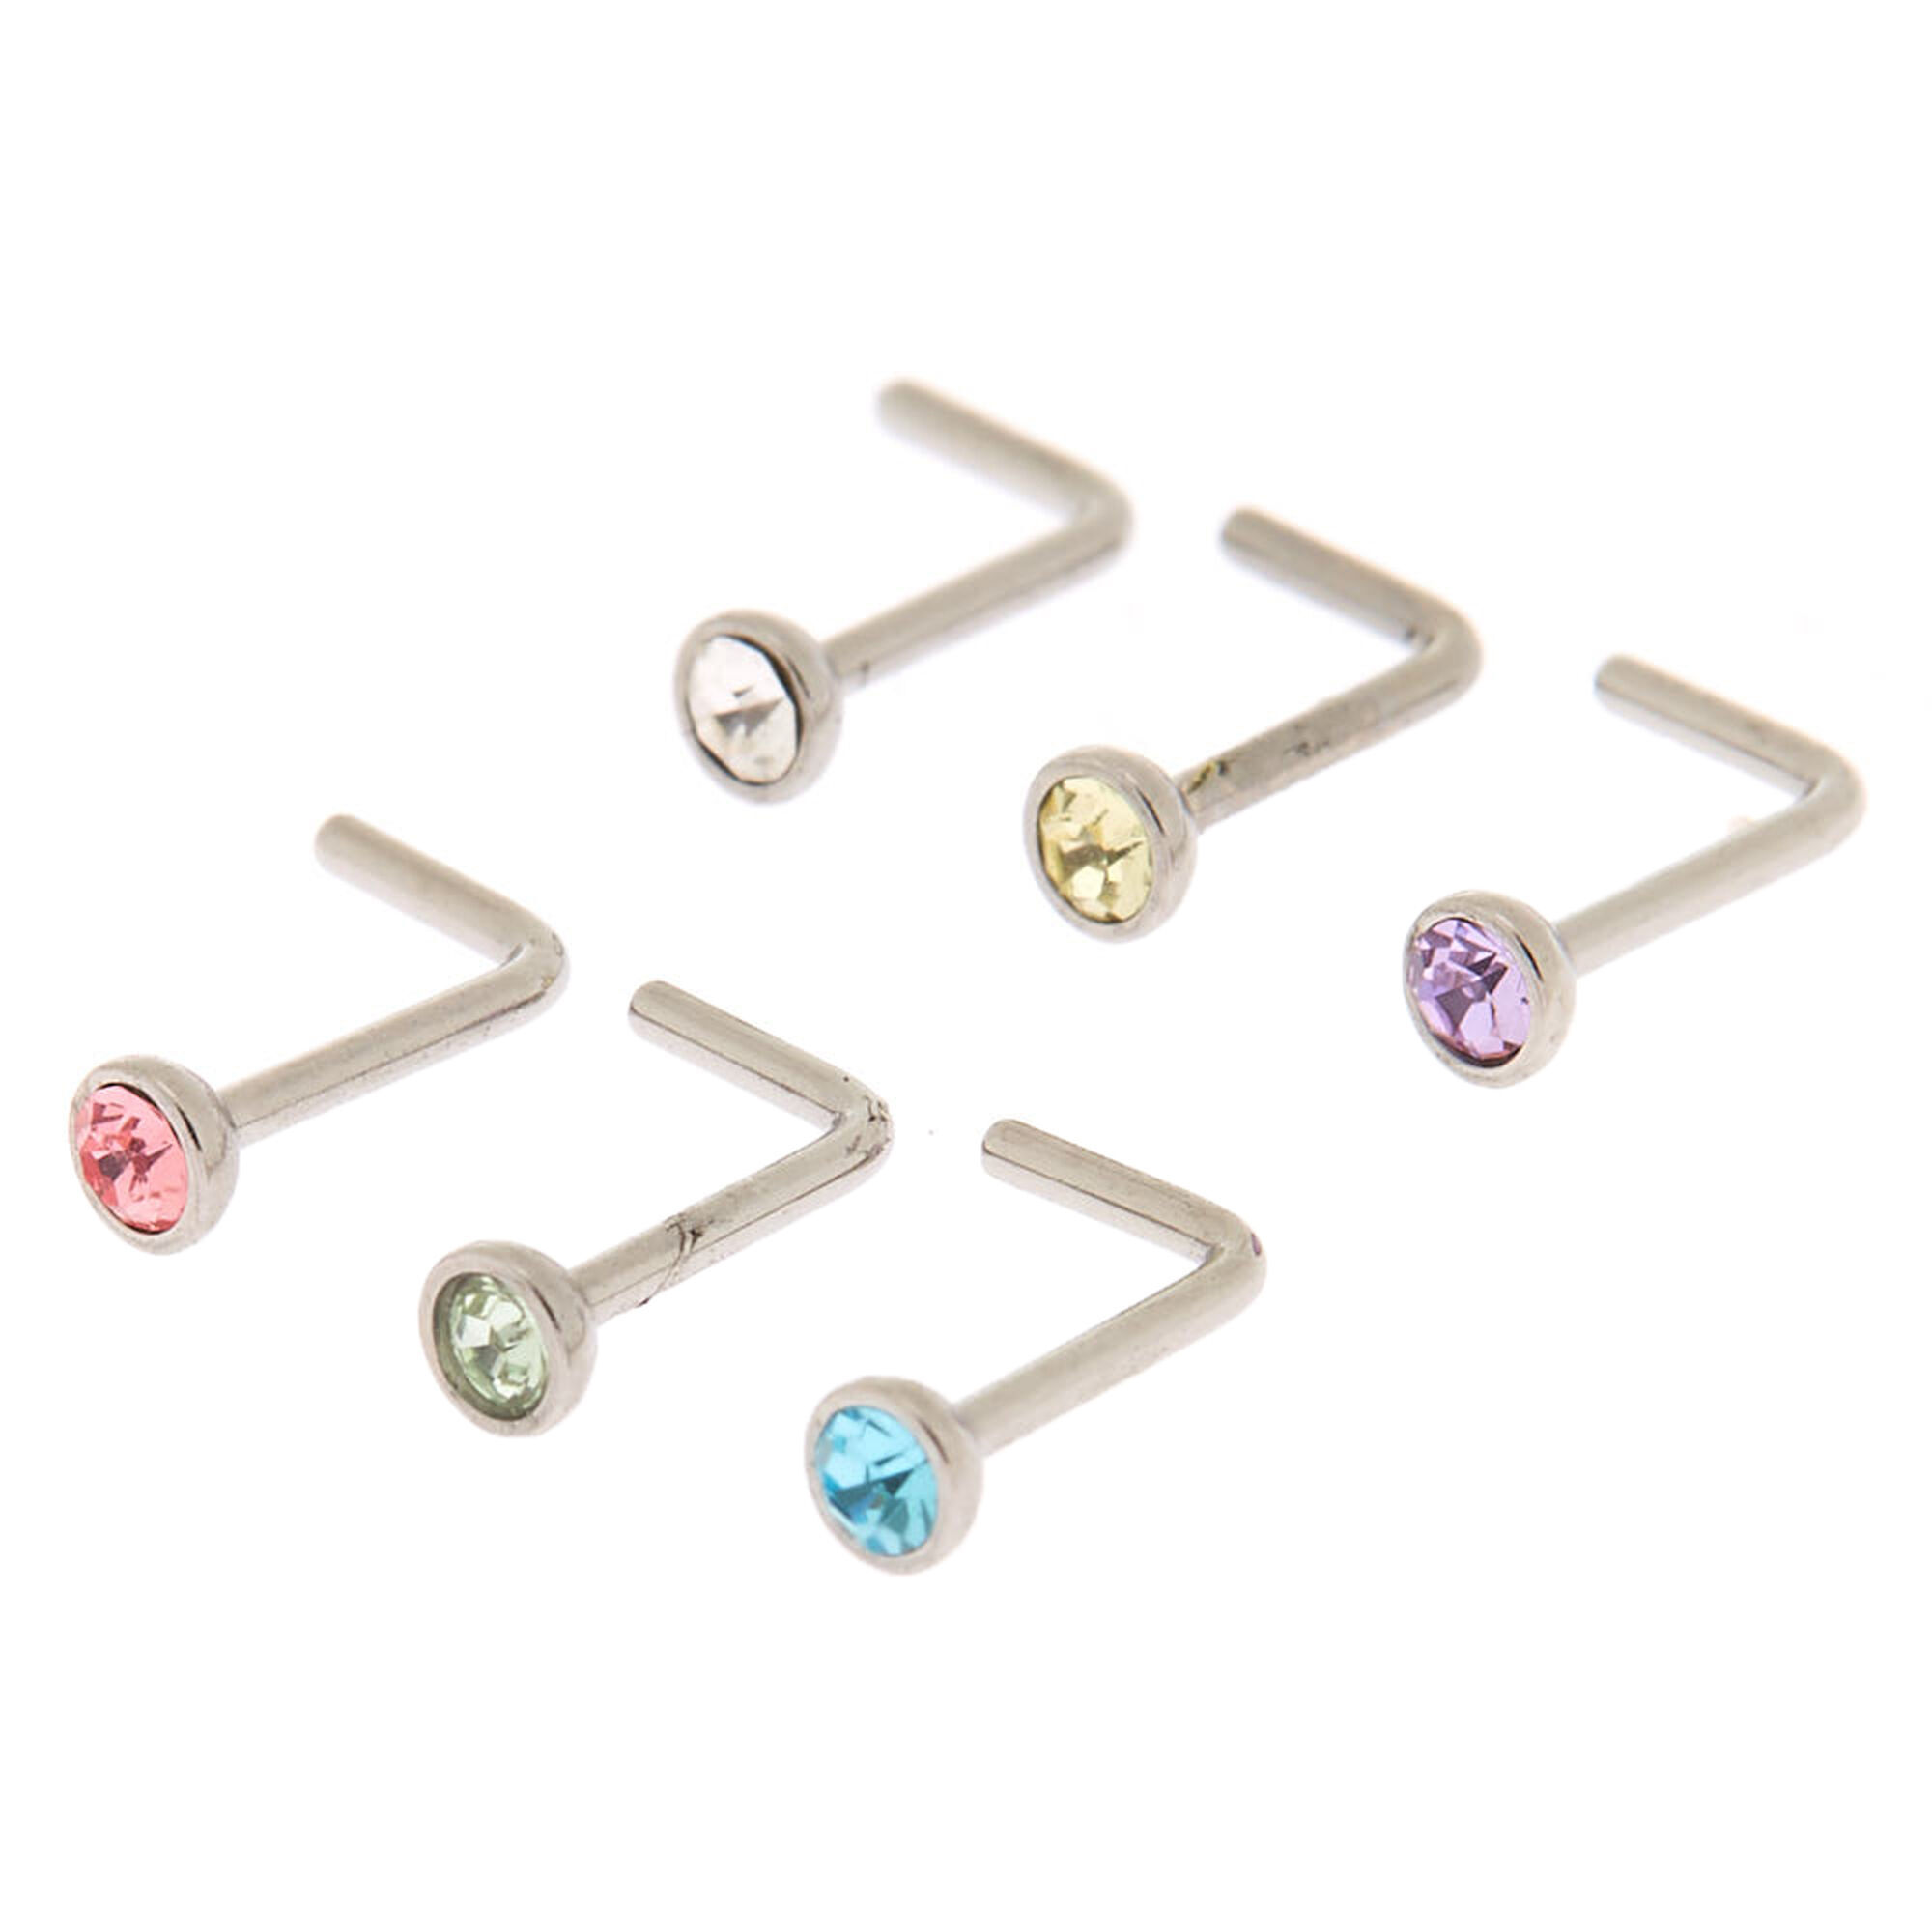 Silver 20G Pastel Stone Nose Studs - 6 Pack